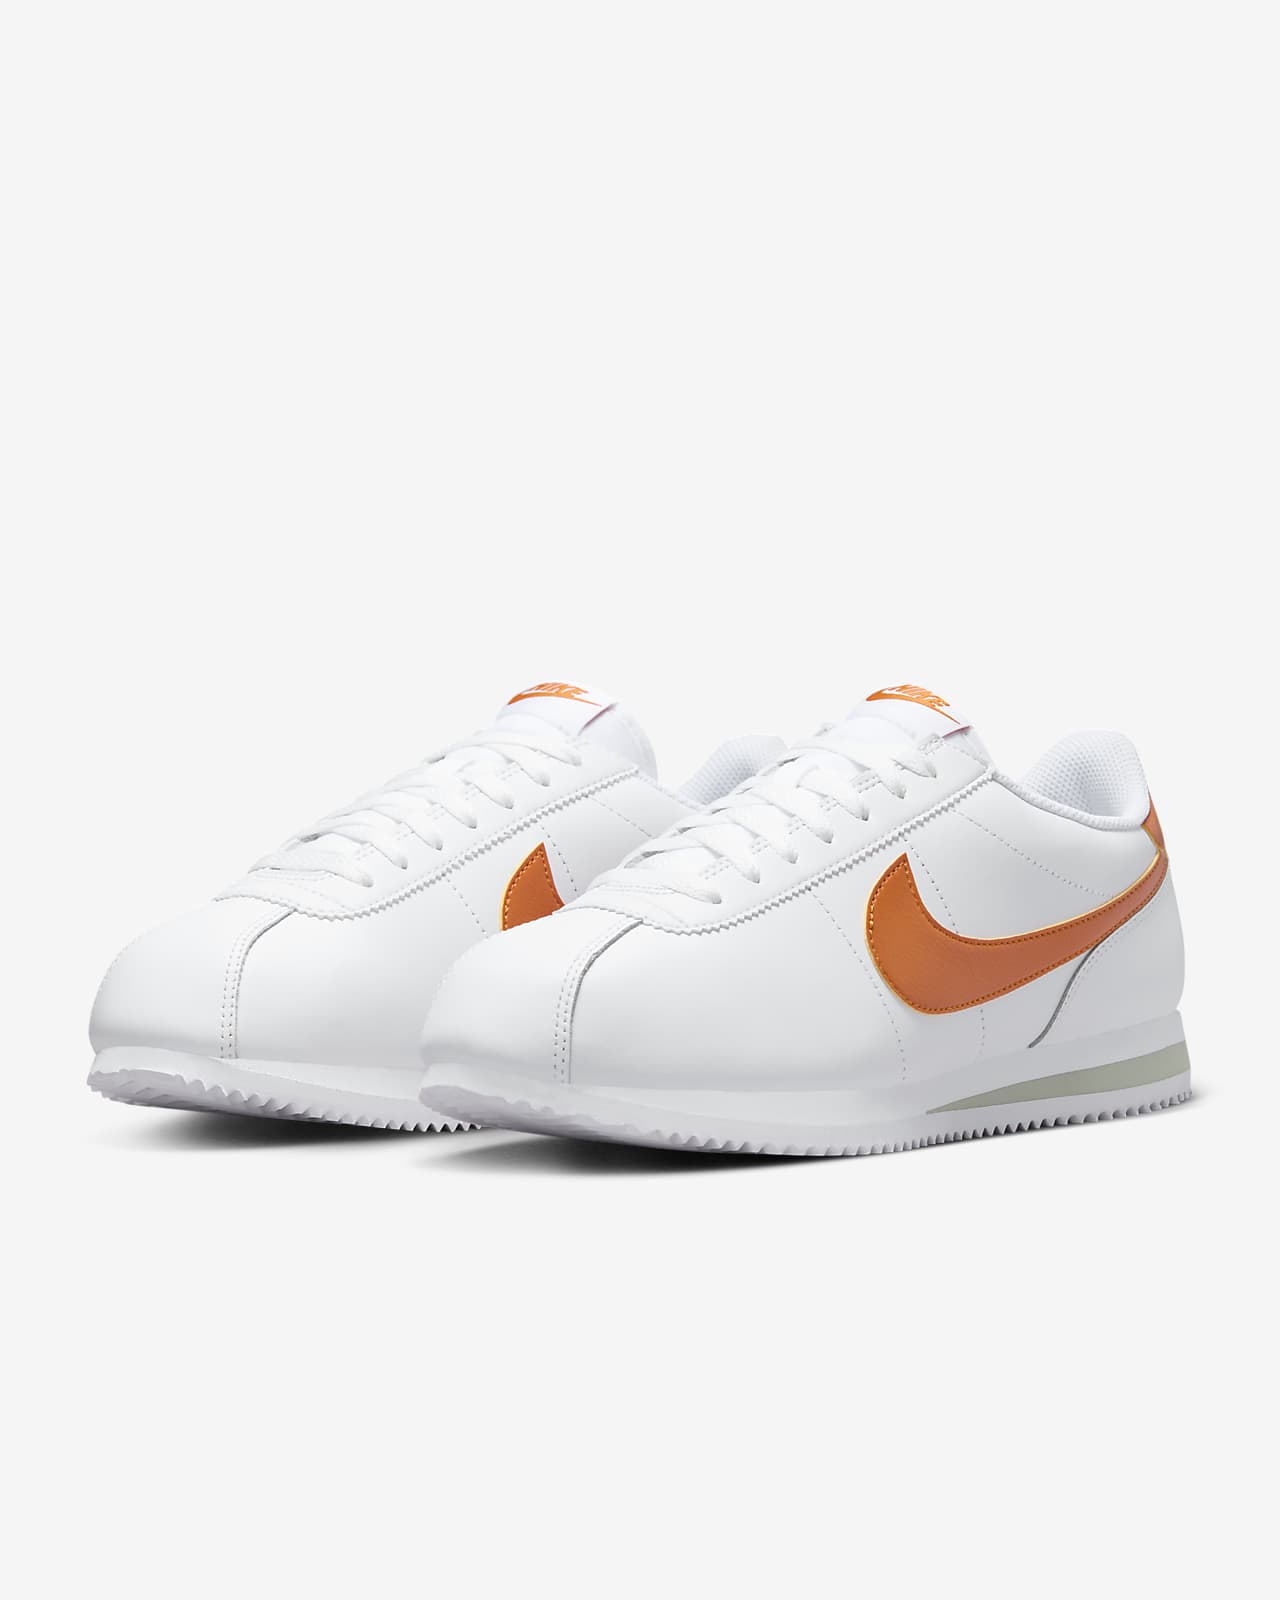 gangster chicano nike cortez